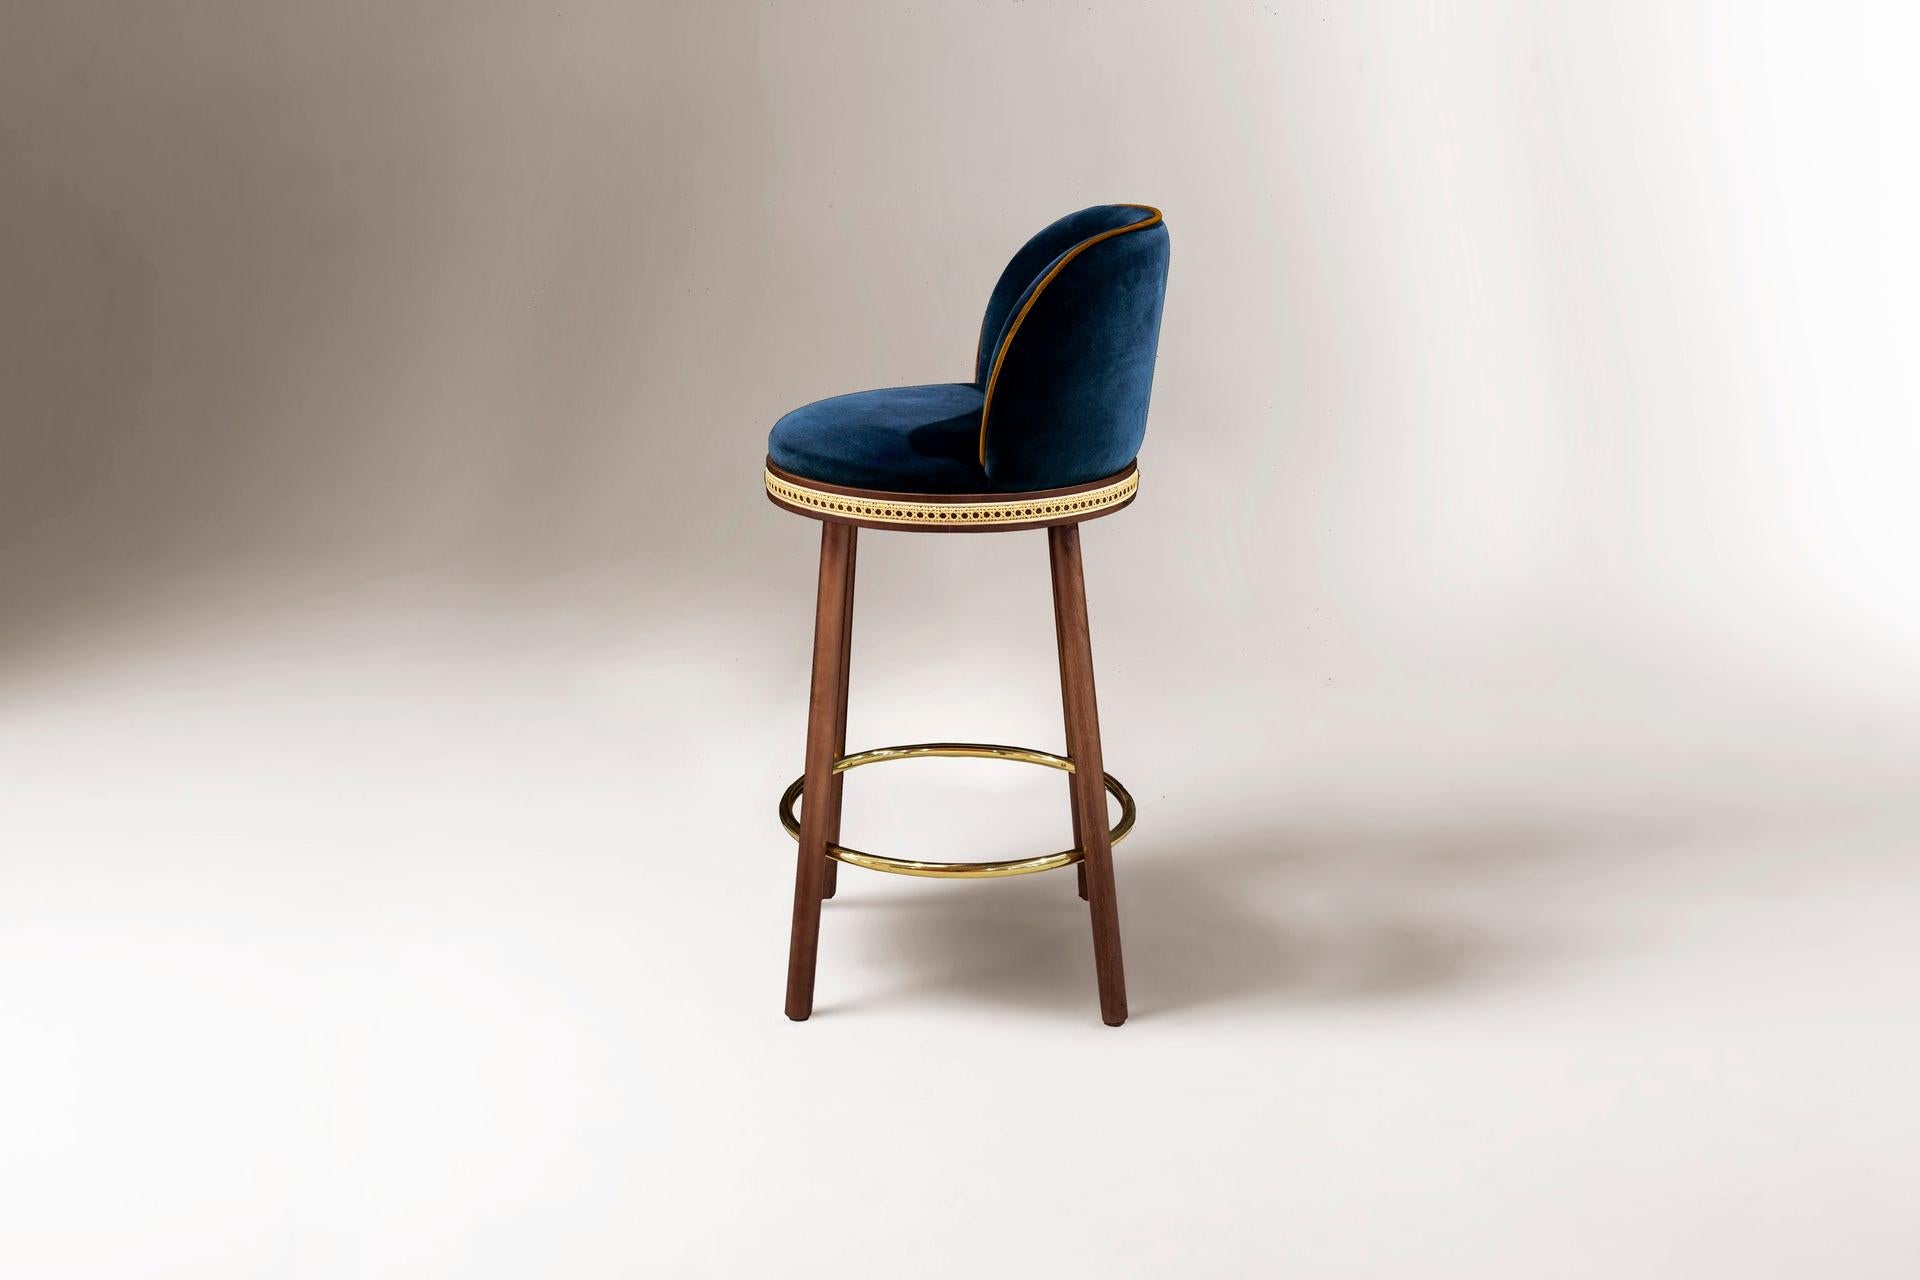 DOOQ Mid-Century Modern Bar Chair Alma with Blue Velvet, Walnut Wood and Brass

In a piece that combines classic and modern aesthetics we can find a certain harmonic gracefulness paired with an intimate voluptuousness that can embrace you and